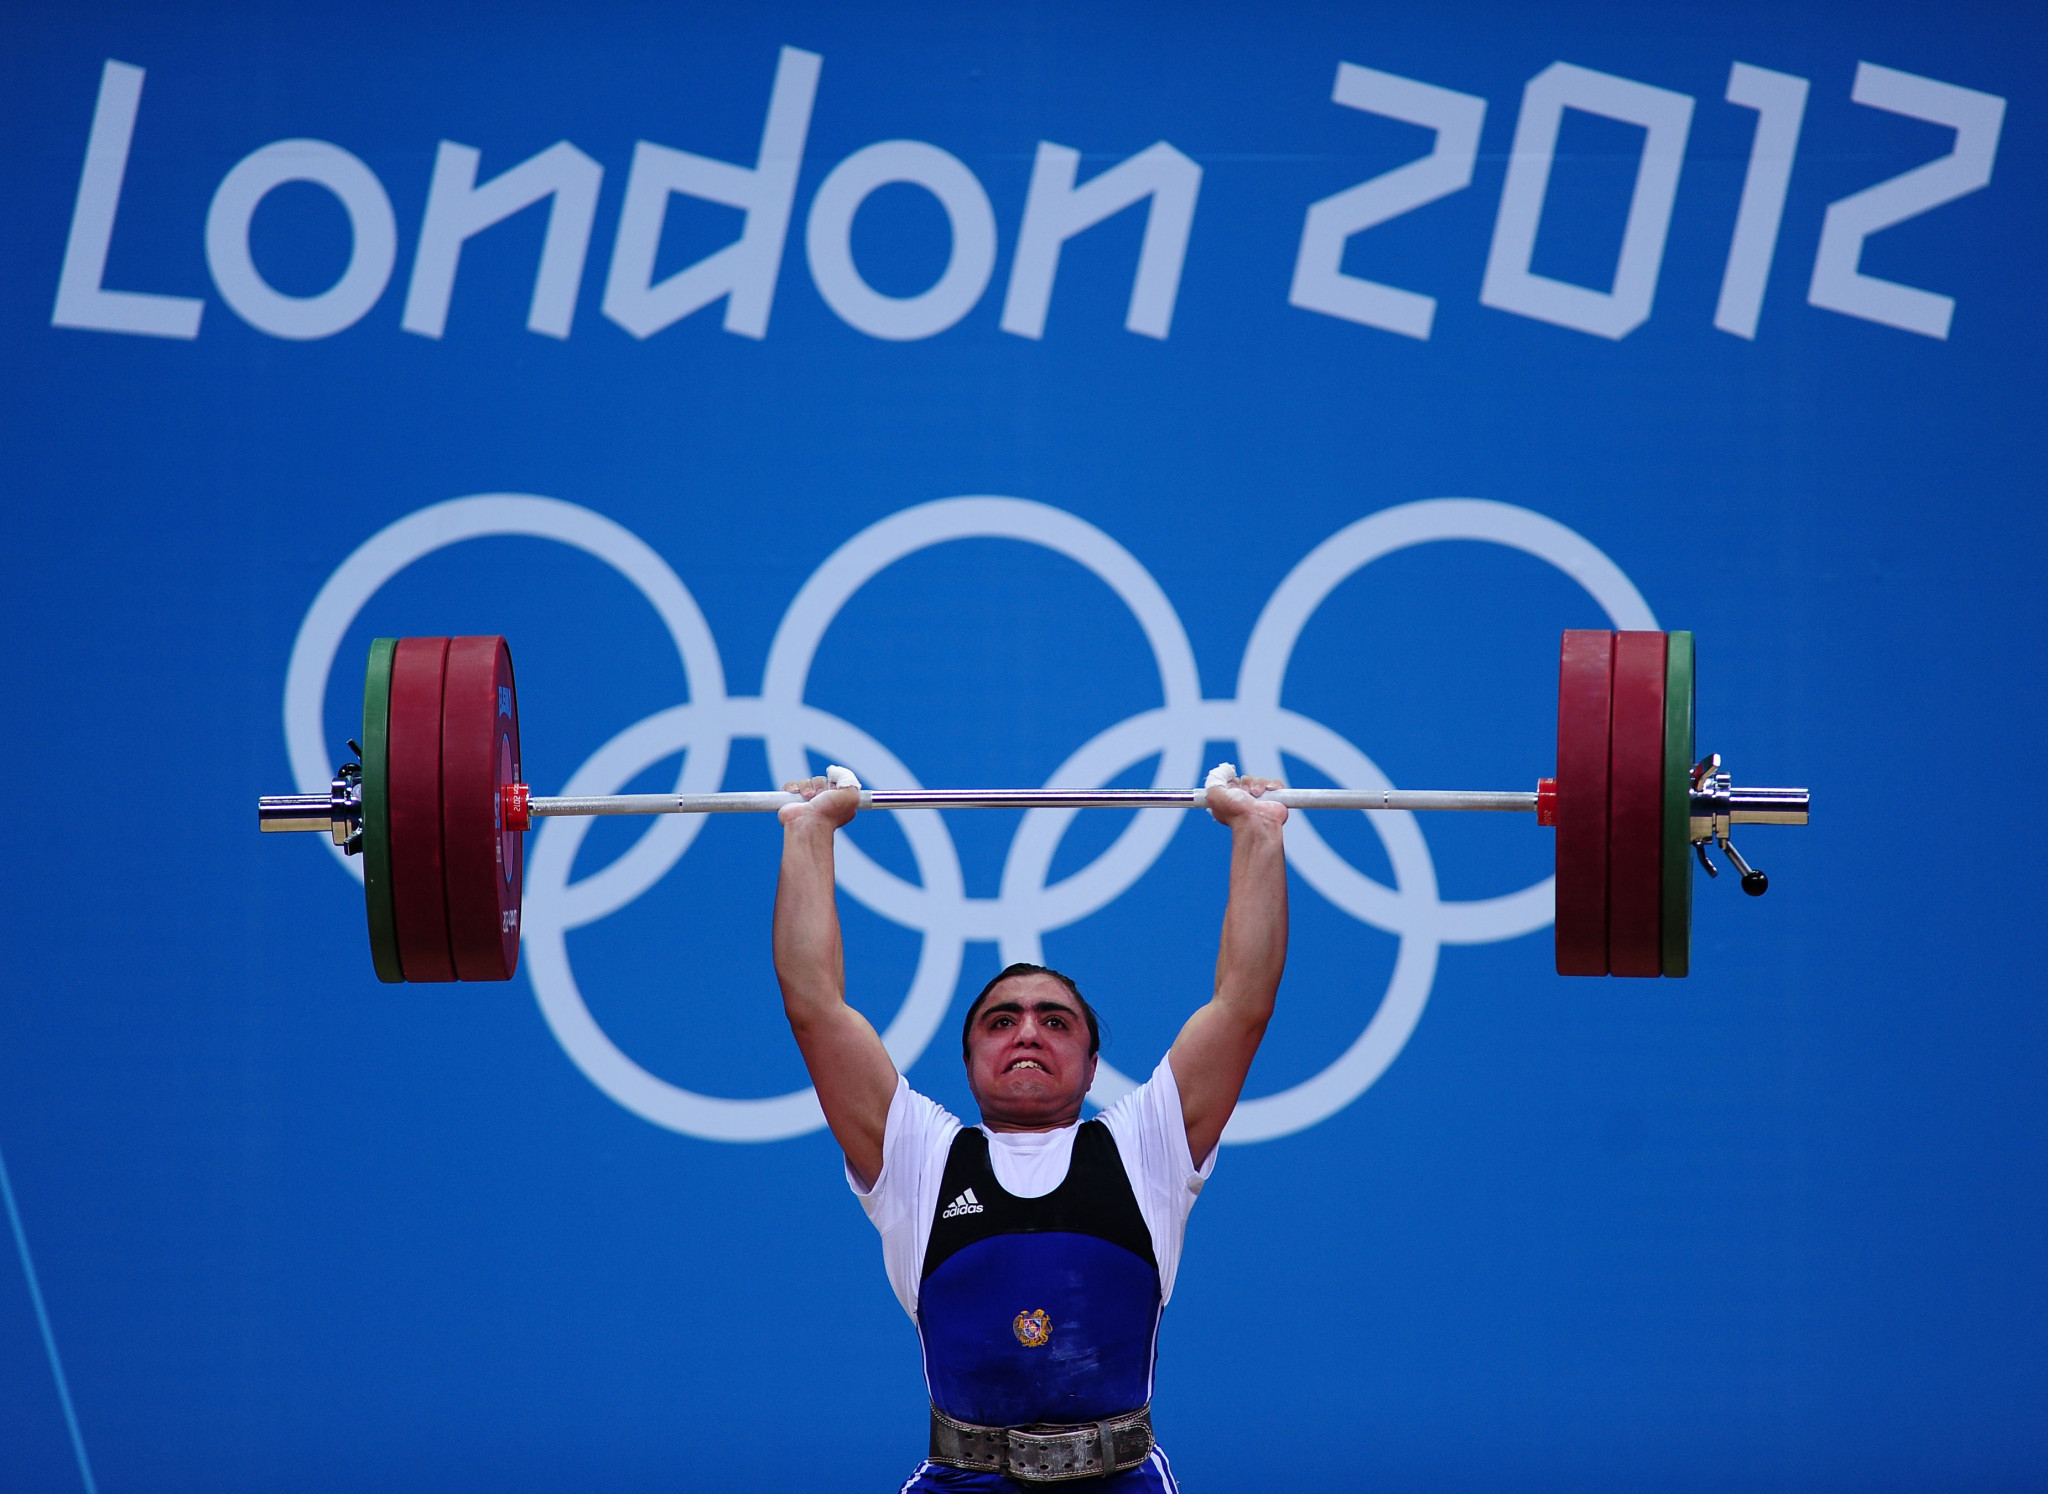 Armenia's Melanie Daluzyan has been disqualified from the women's 69kg weightlifting event at the London 2012 Olympic Games ©Getty Images